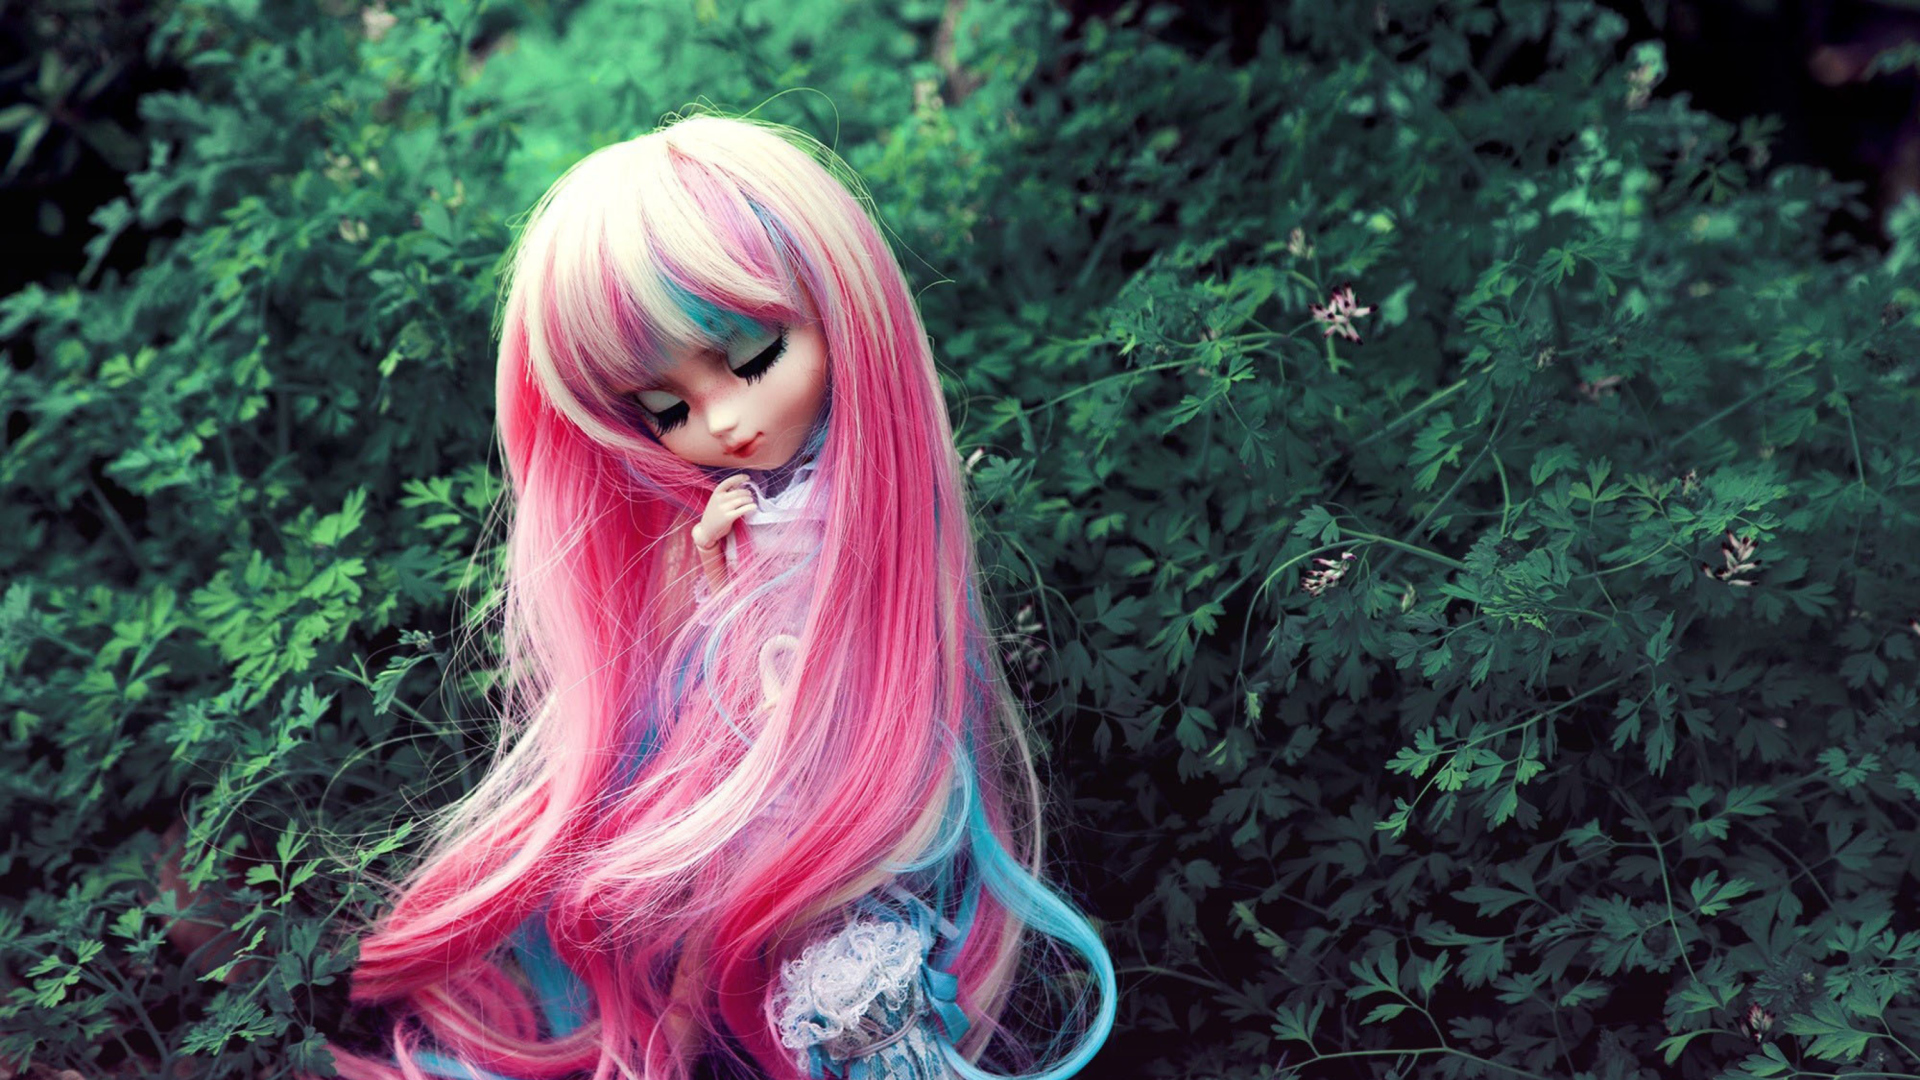 Doll With Pink Hair wallpaper 1920x1080